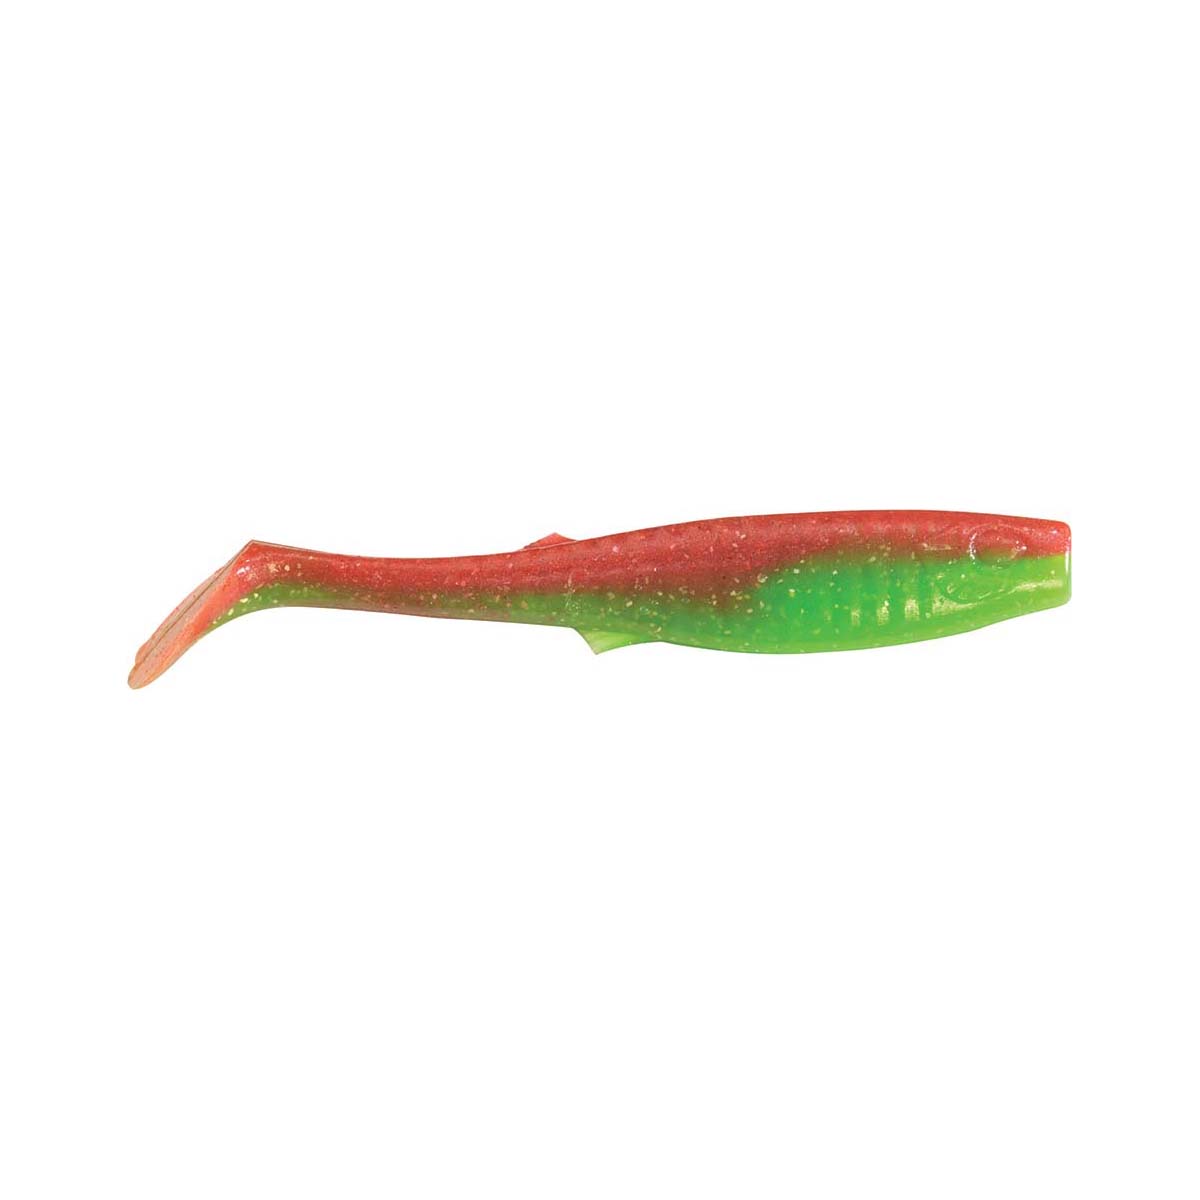 Berkley Gulp! Paddletail Shad Soft Plastic Lure 5in Nuclear Chicken